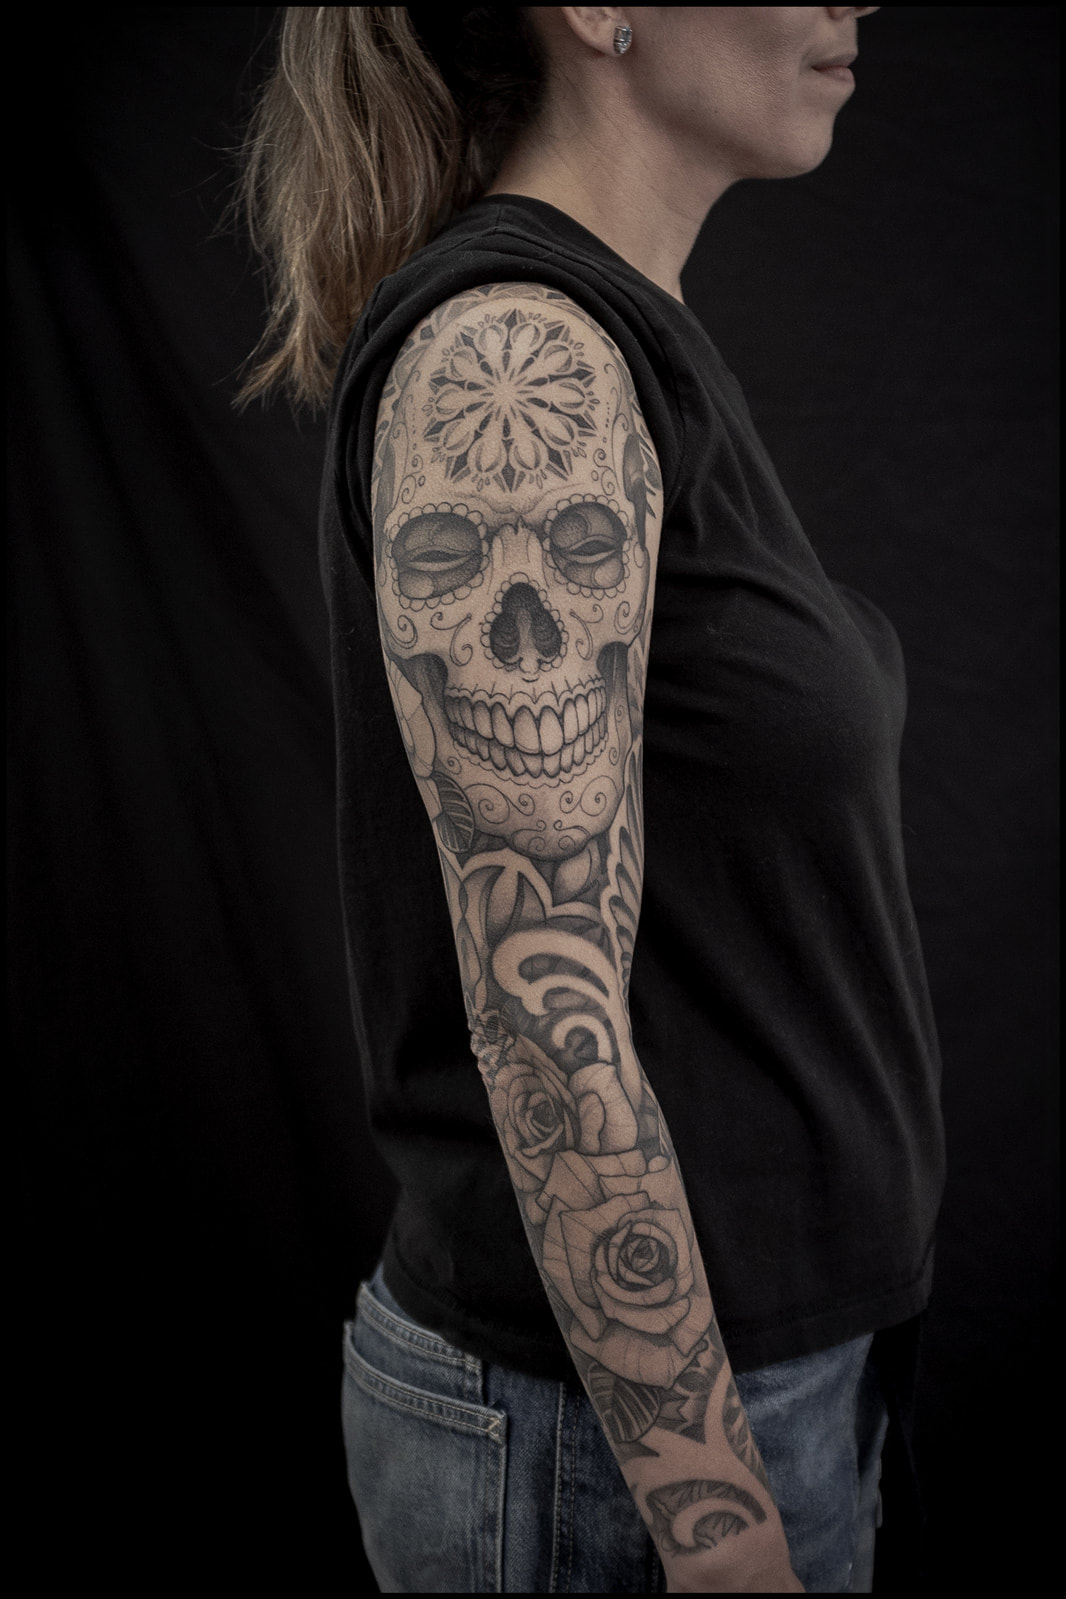 Woman with geometric sleeve tattoo featuring a skull by Adam LoRusso